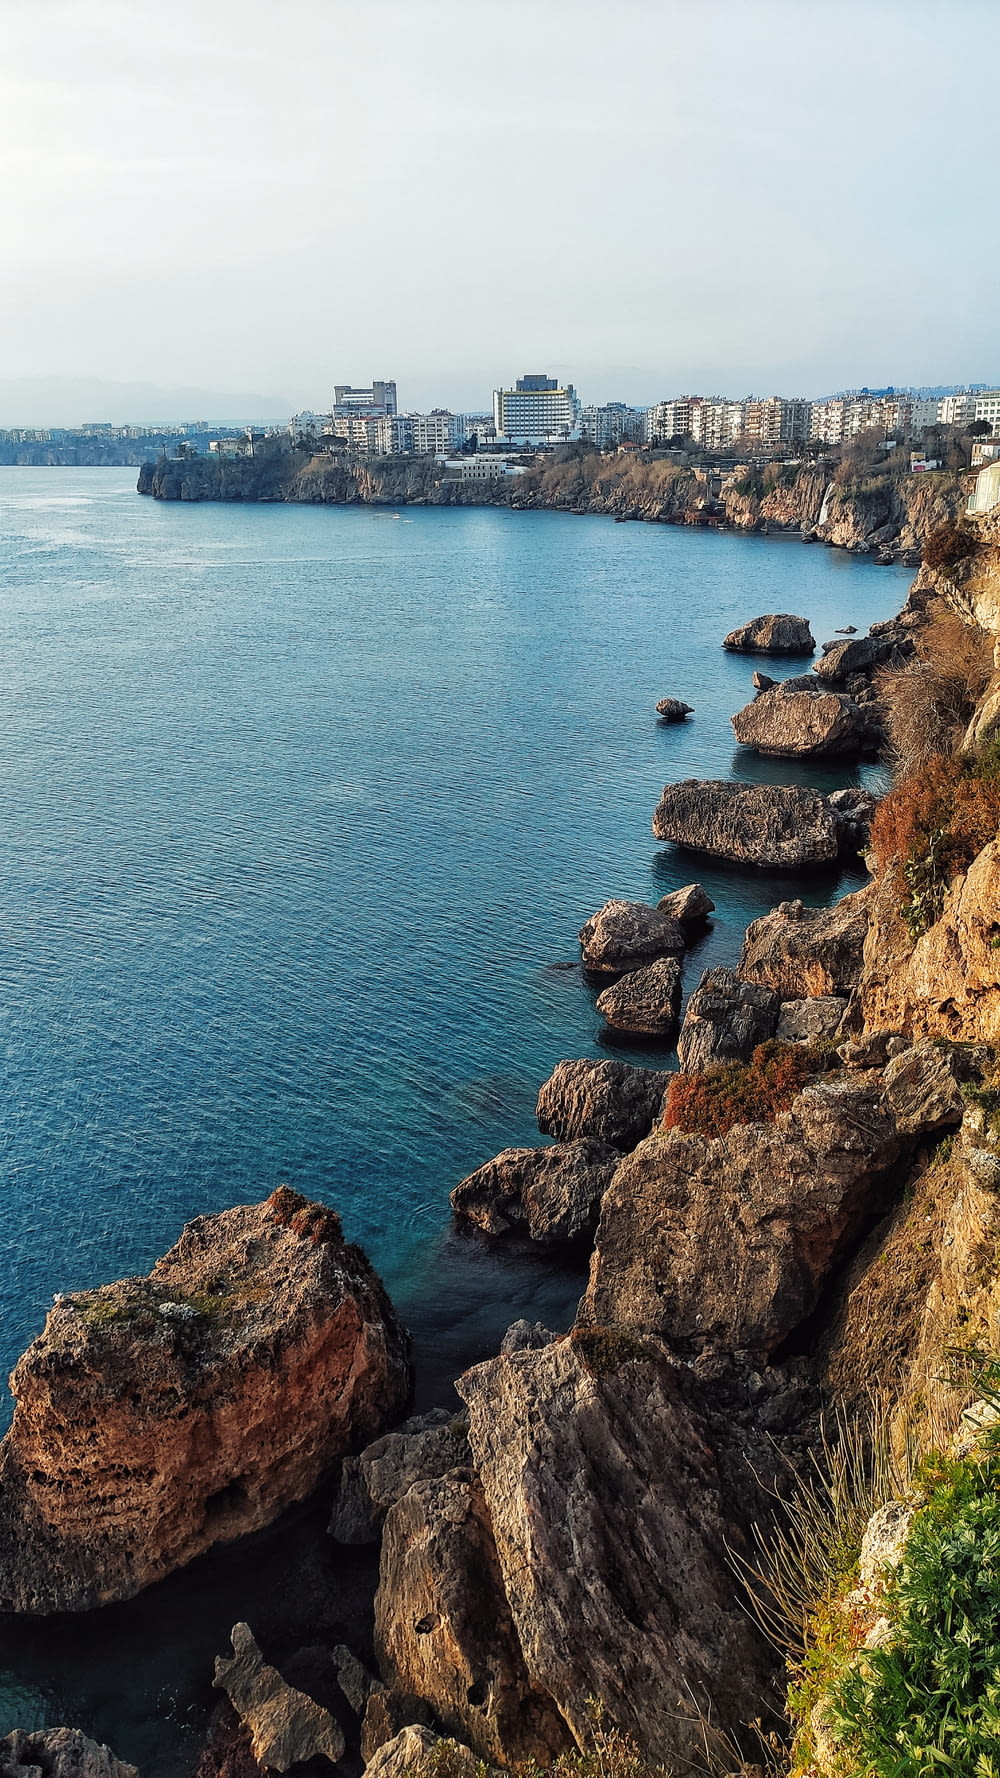 a rocky shoreline with a city in the background